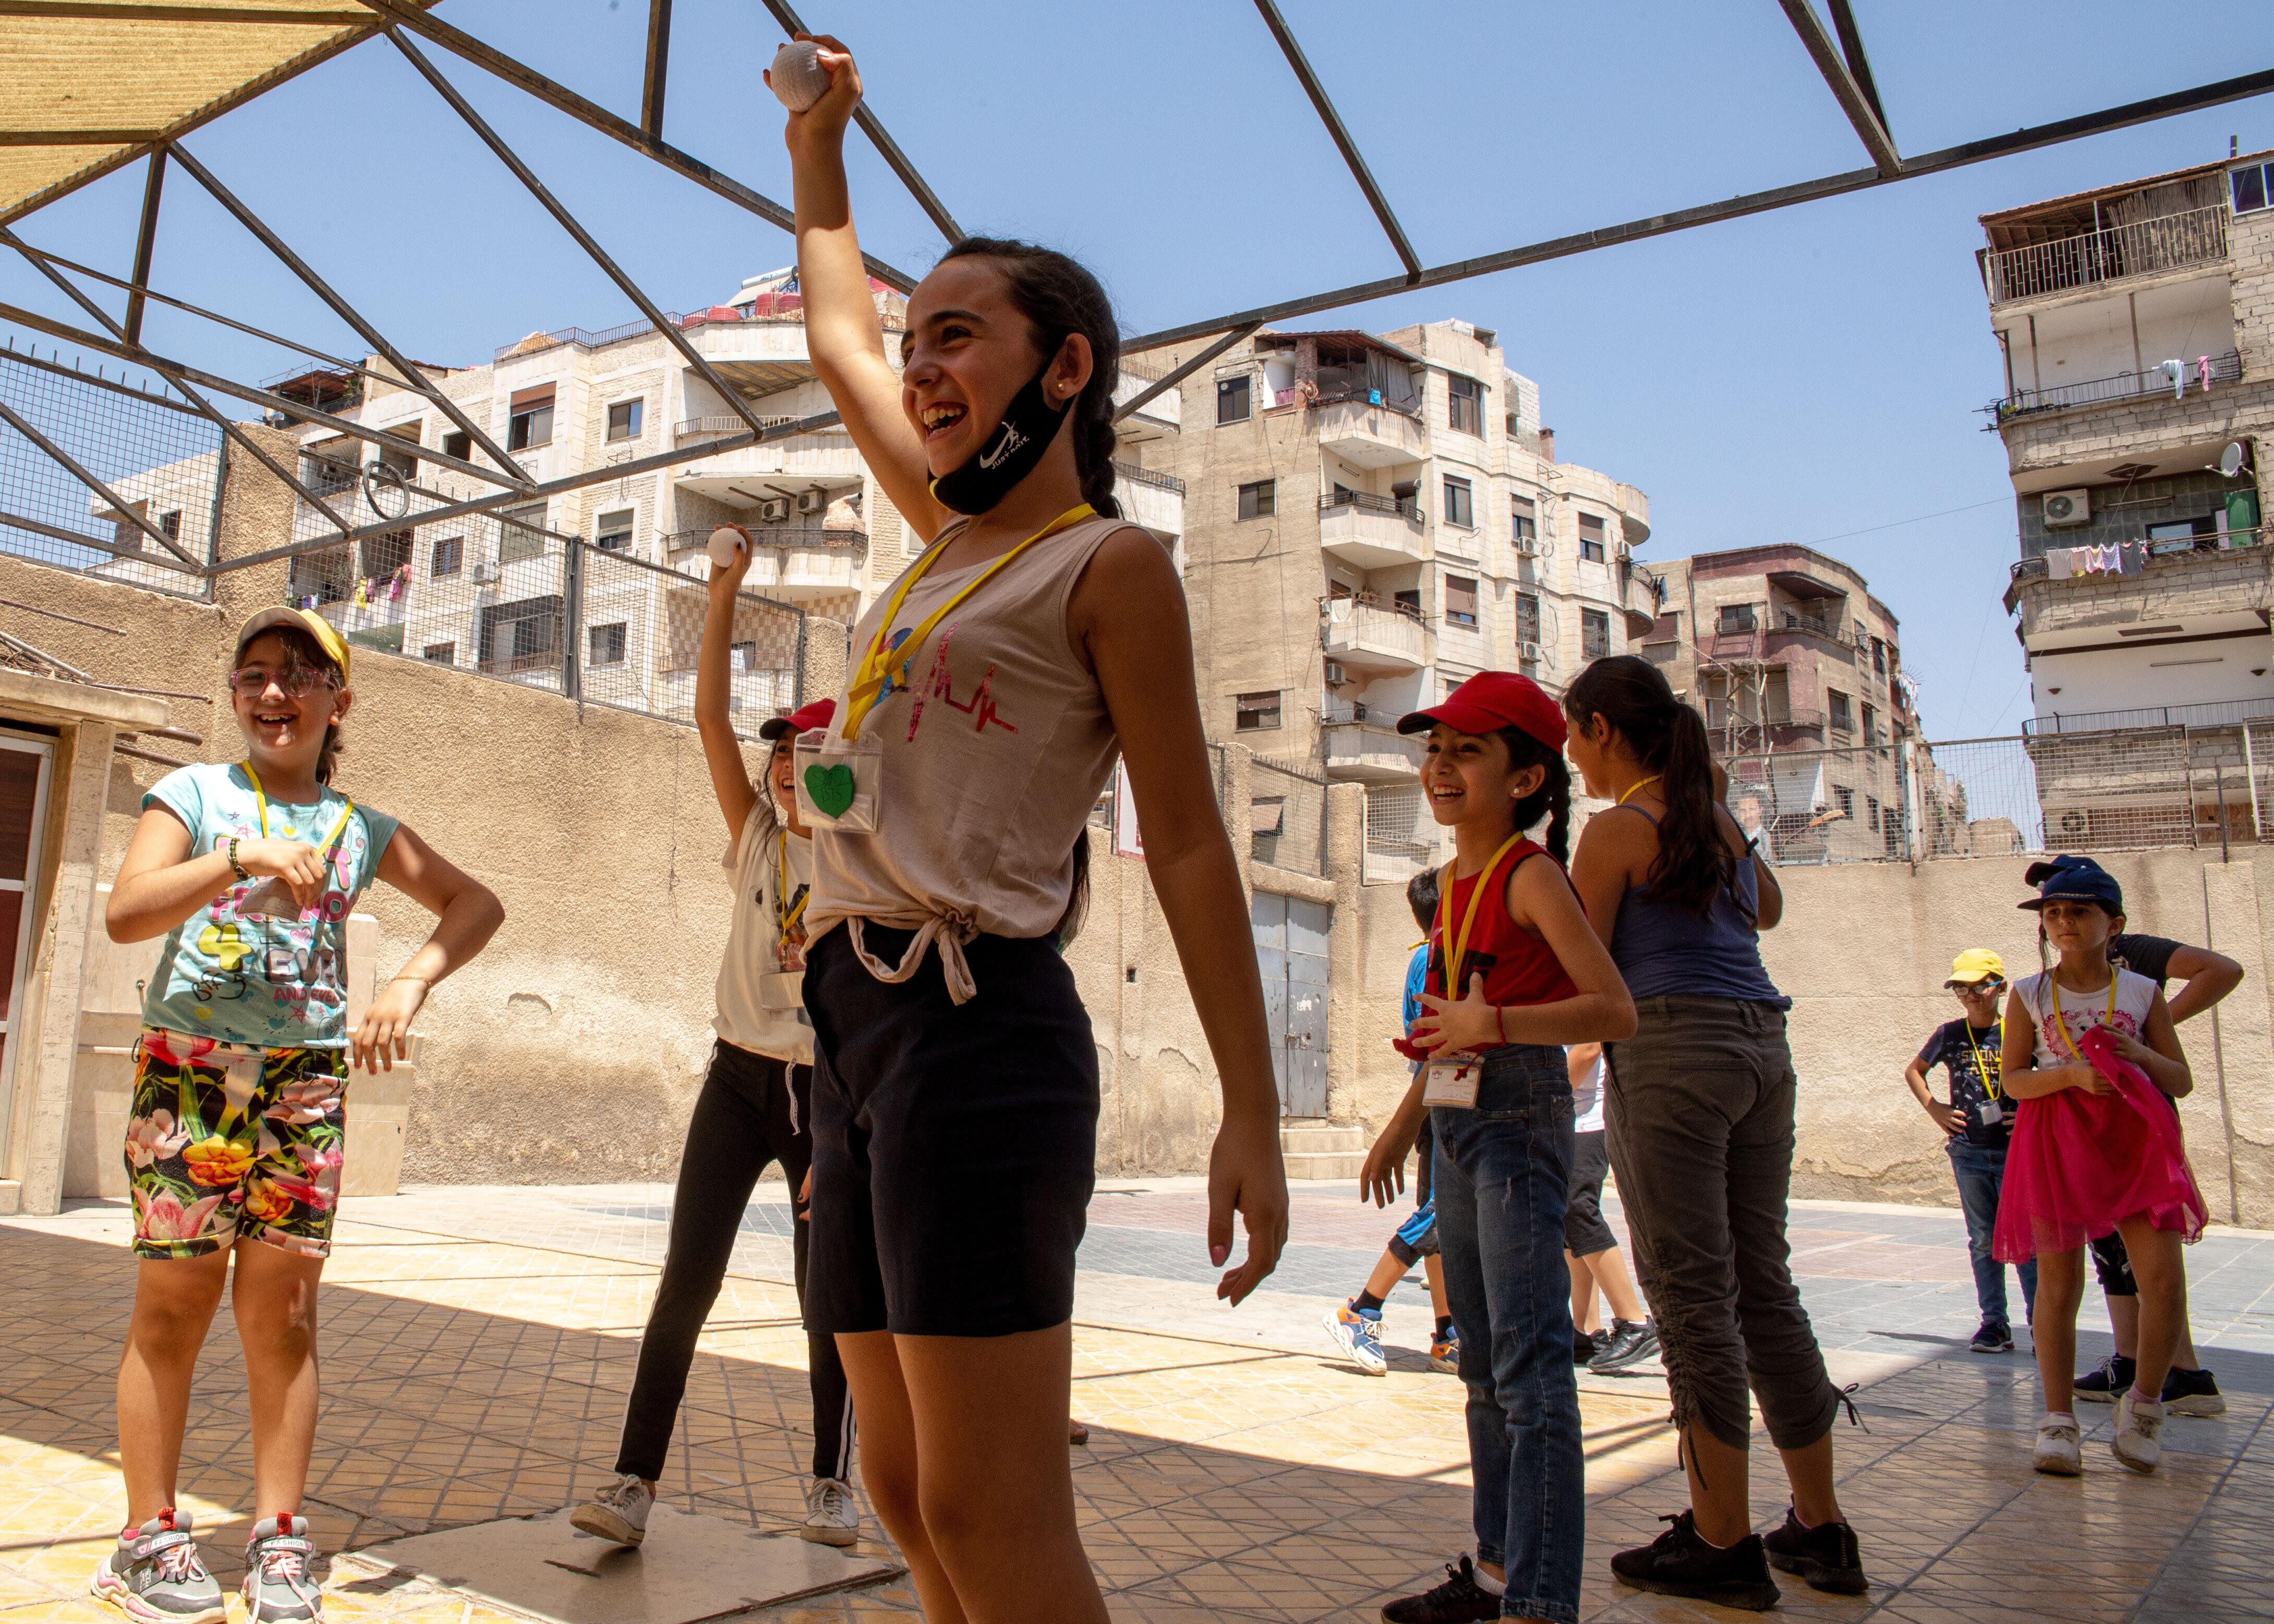 Children playing in school yard surrounded by cement walls, with apartment buildings behind.